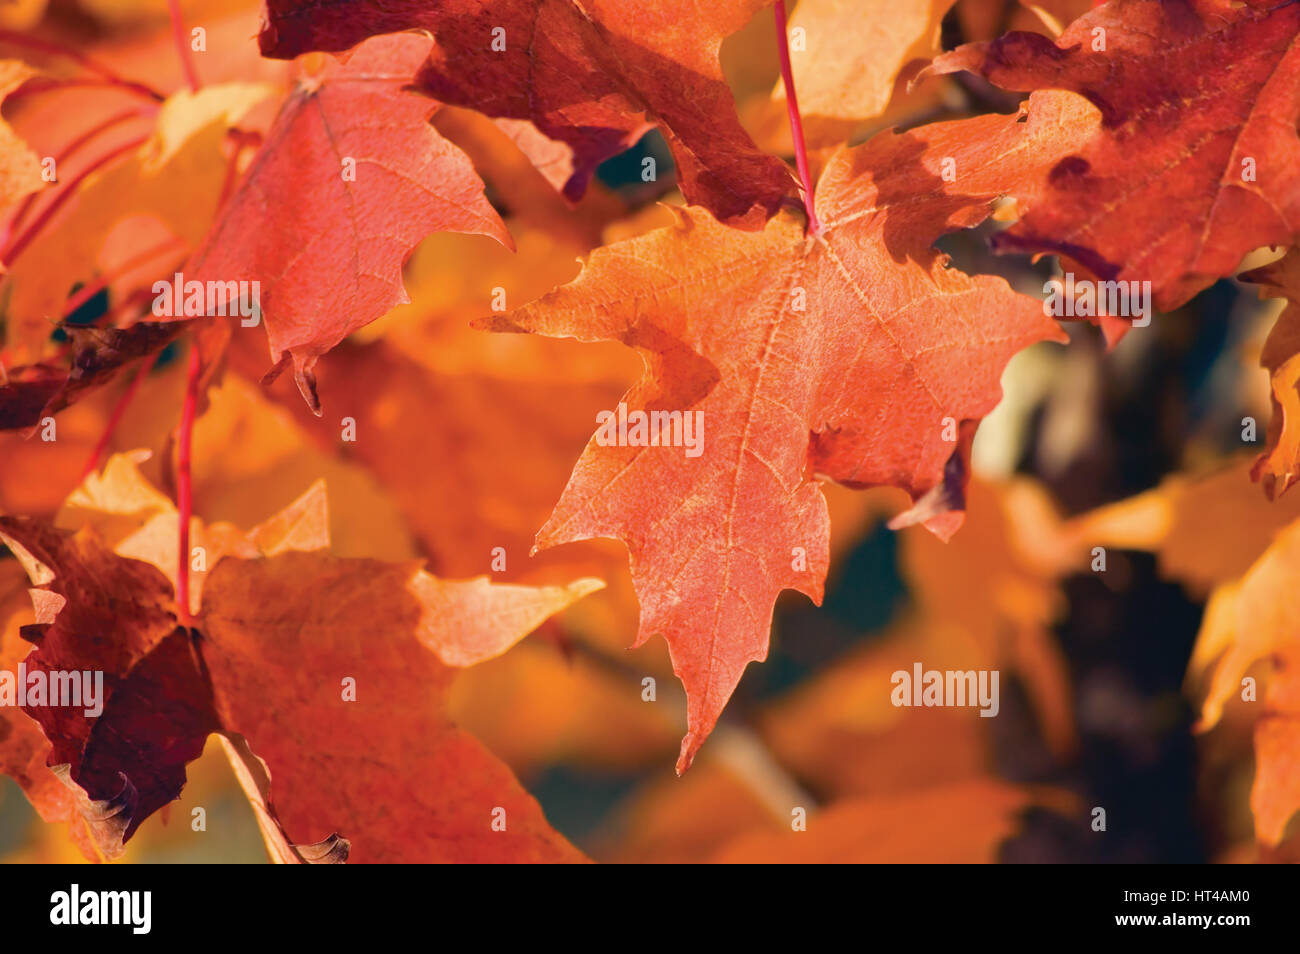 Red acer grandidentatum nutt. bigtooth maple leaves in autumn, detailed horizontal leaf closeup background pattern Stock Photo